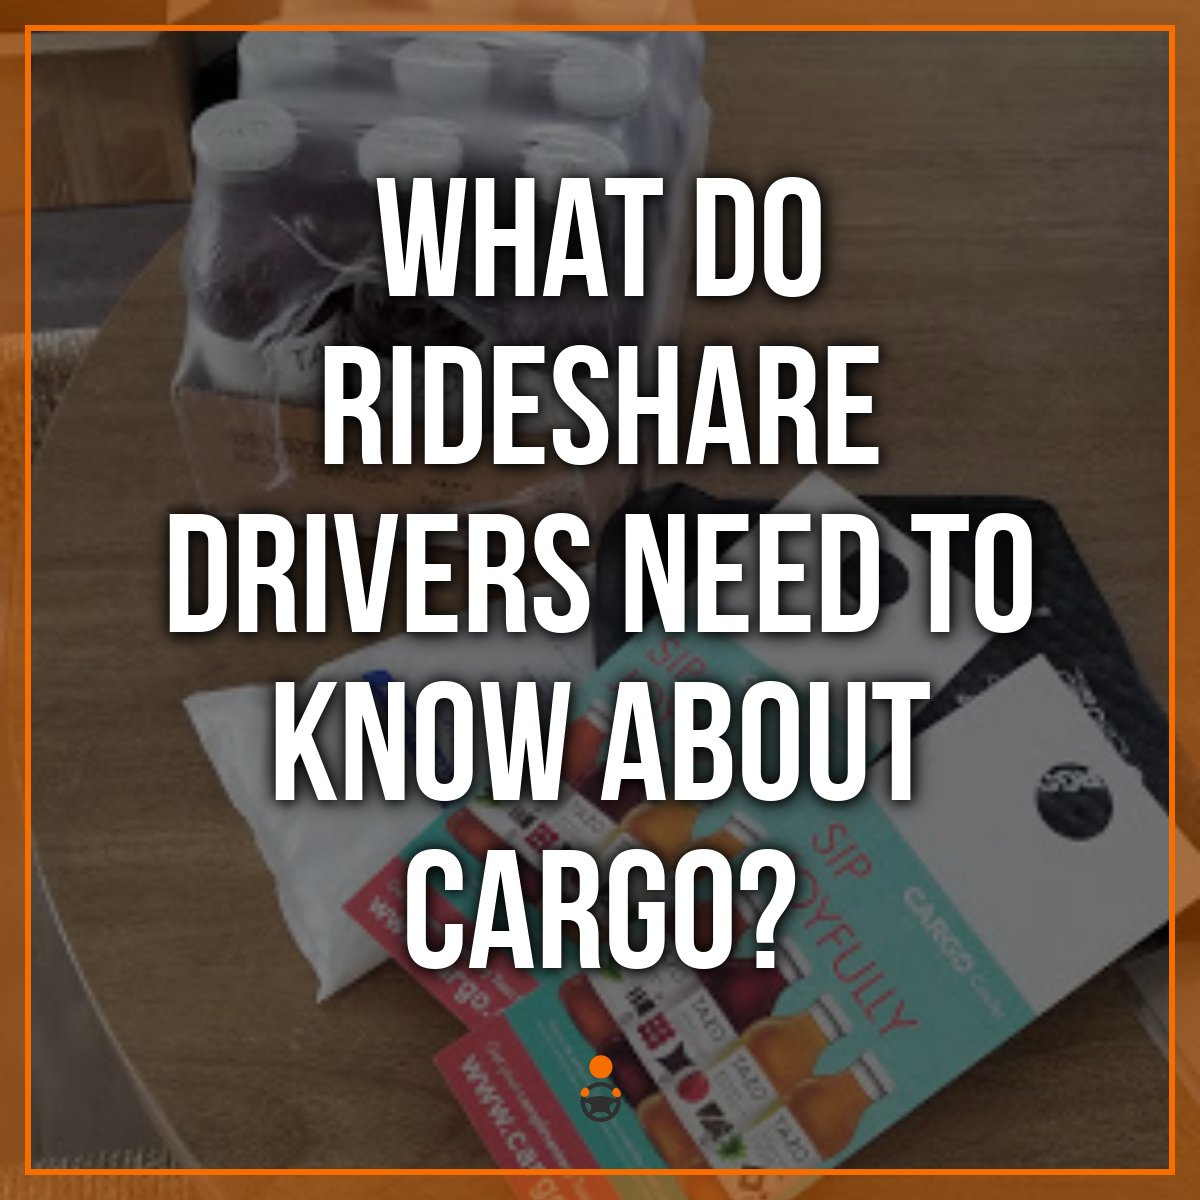 What Do Rideshare Drivers Need to Know About Cargo?